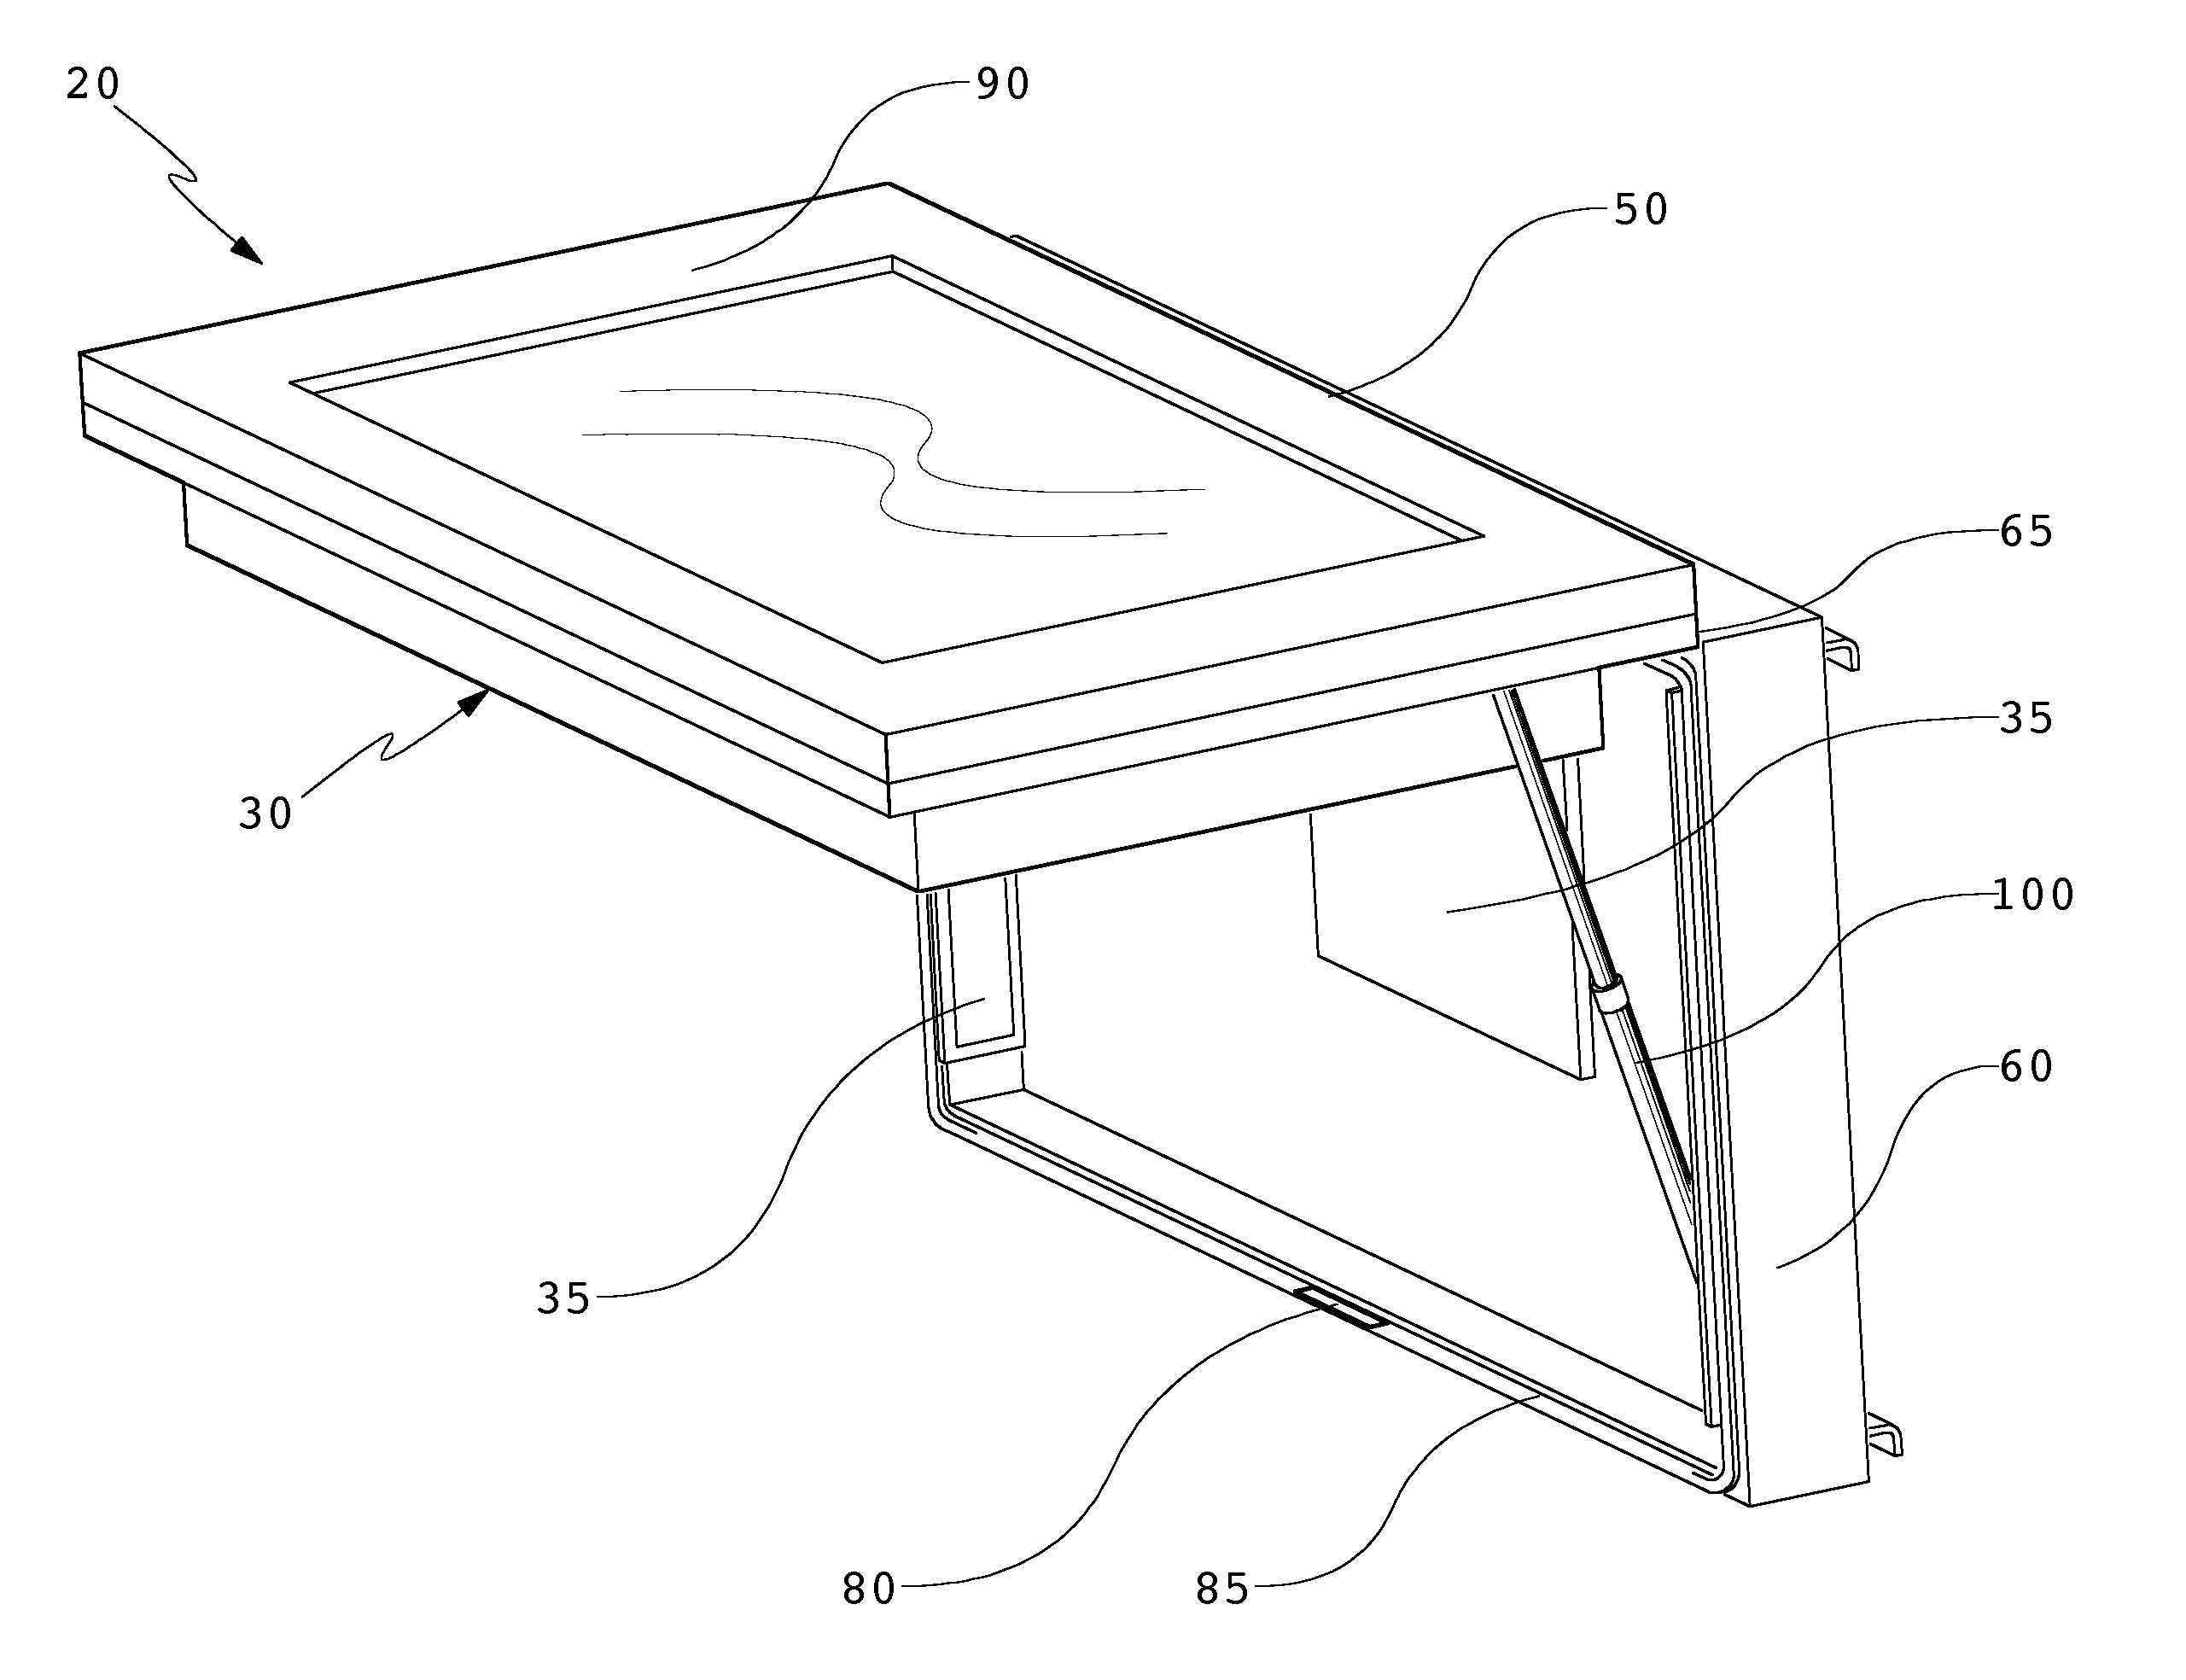 Field serviceable electronic display